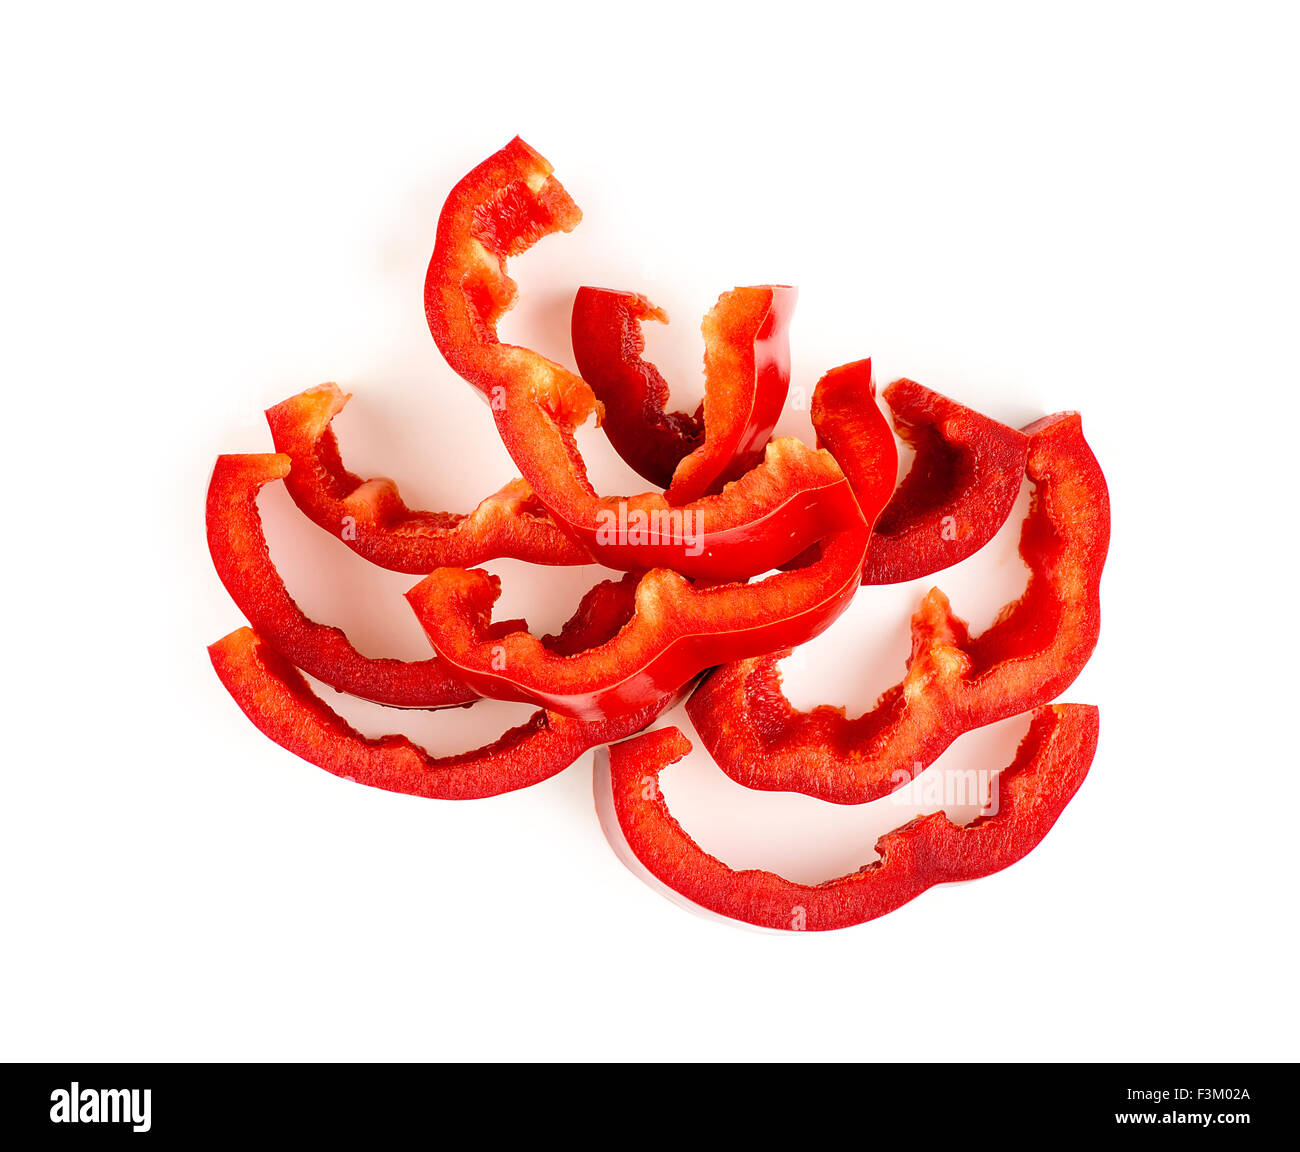 Juicy red bell pepper cut up and isolated on white Stock Photo